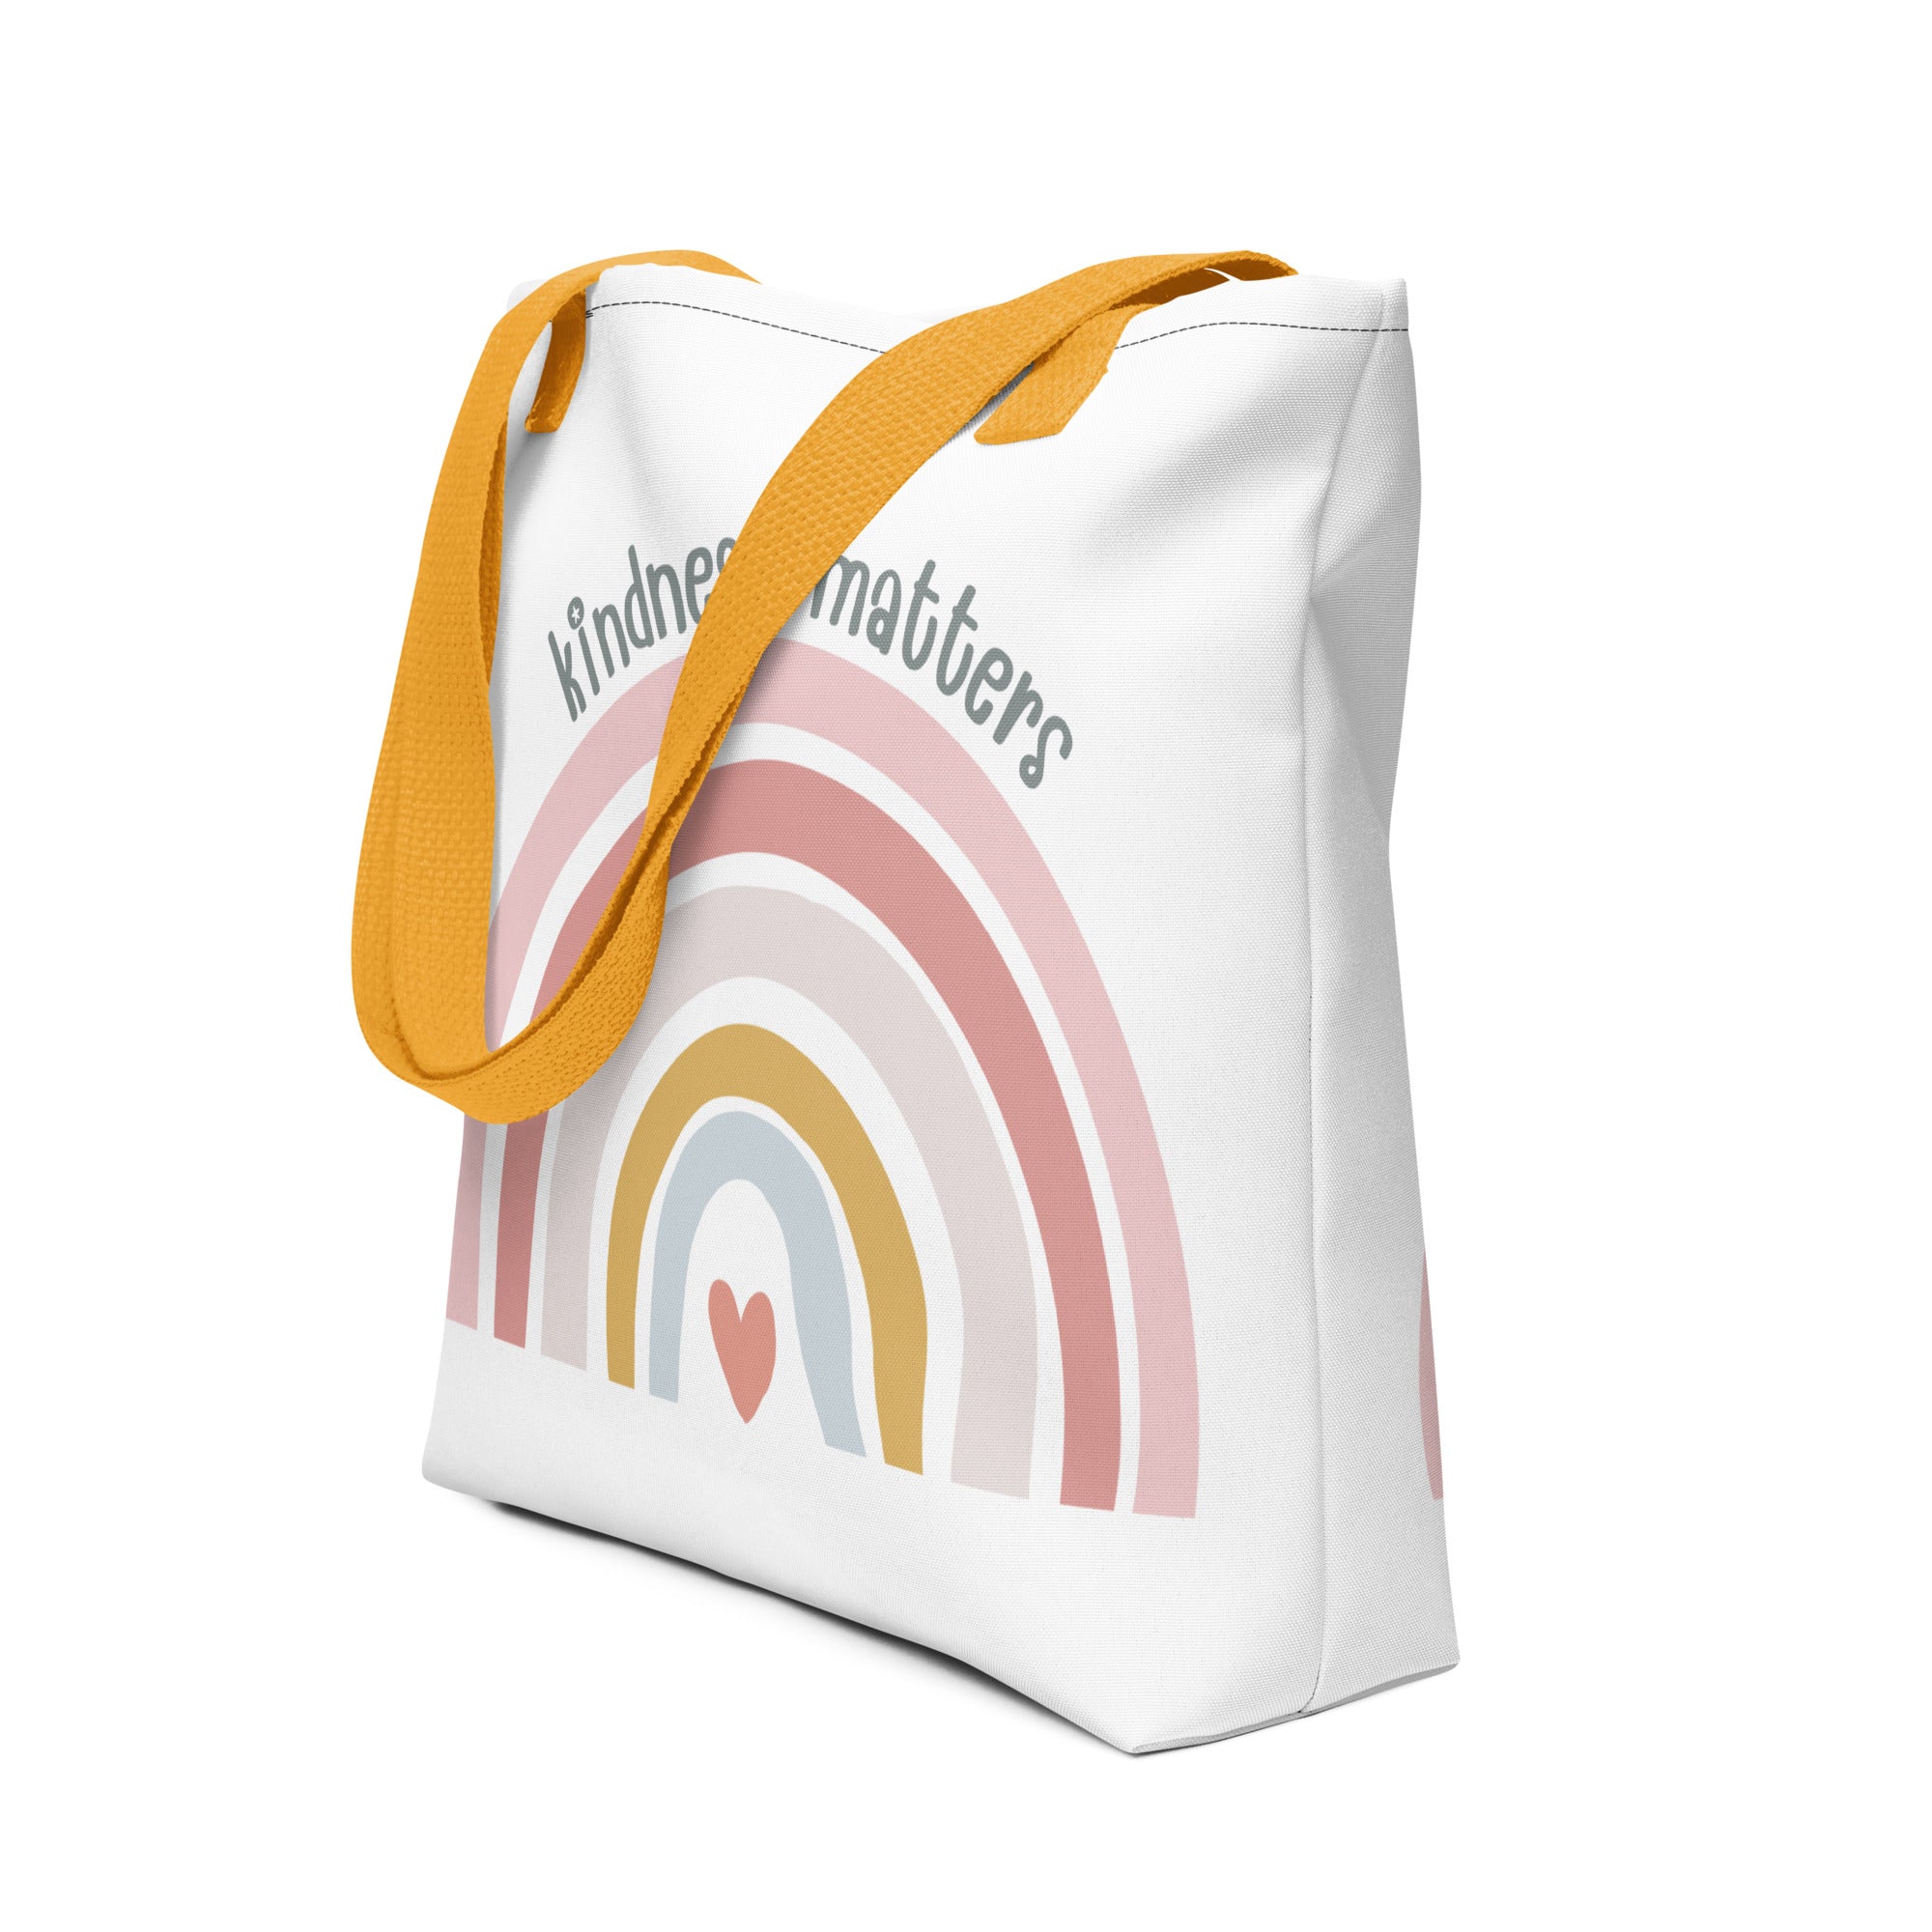 Kindness Matters - Tote Bag